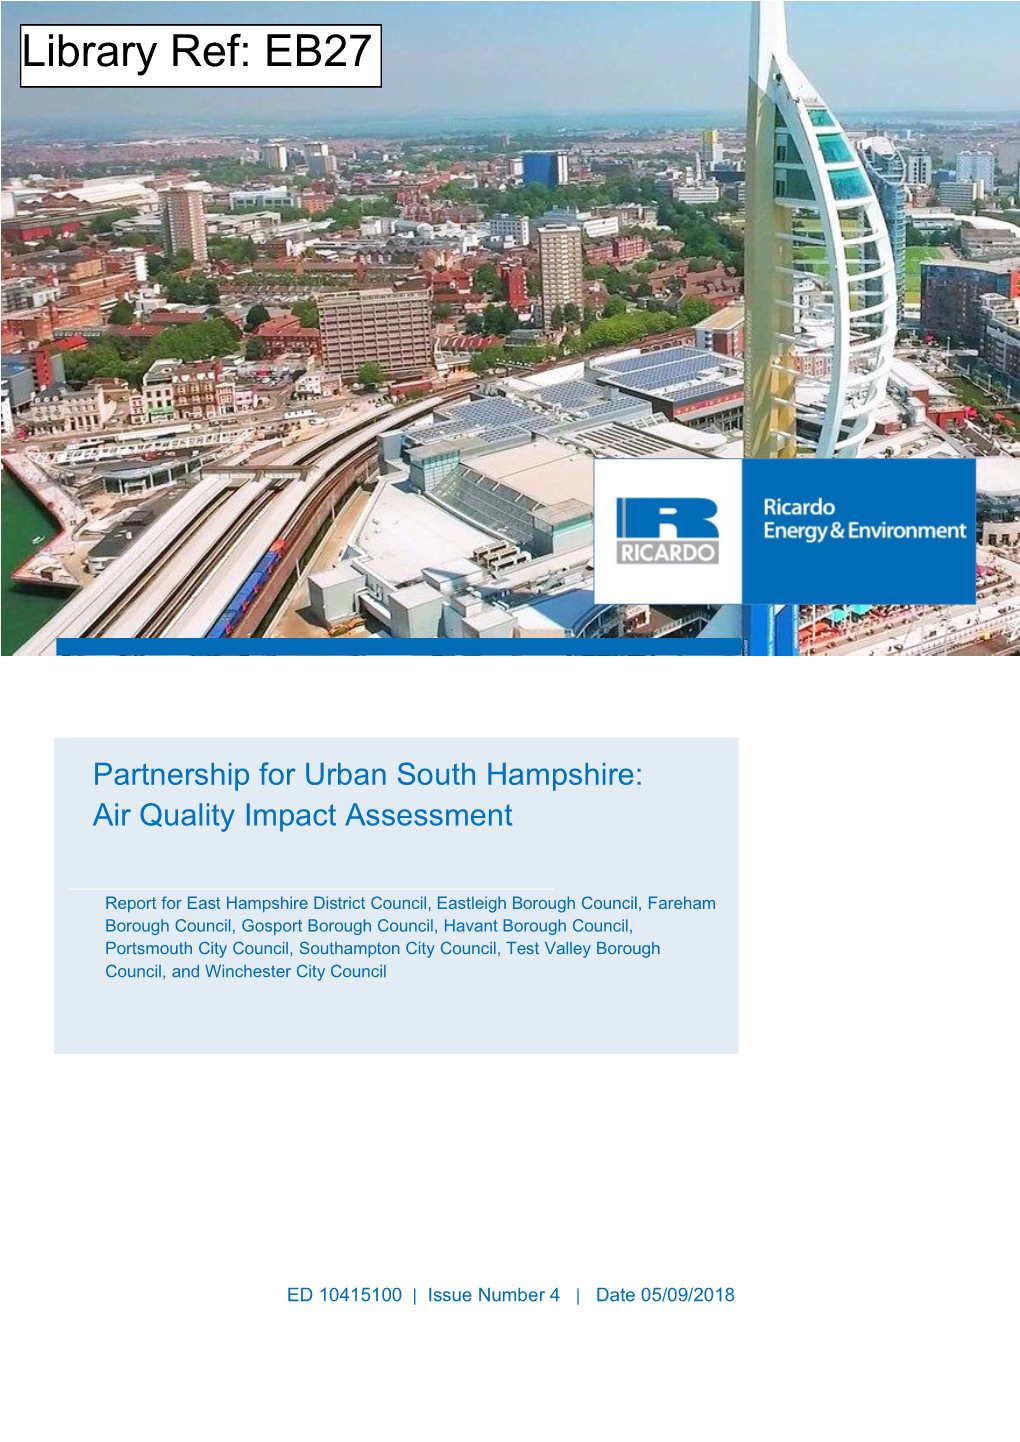 Partnership for Urban South Hampshire: Air Quality Impact Assessment